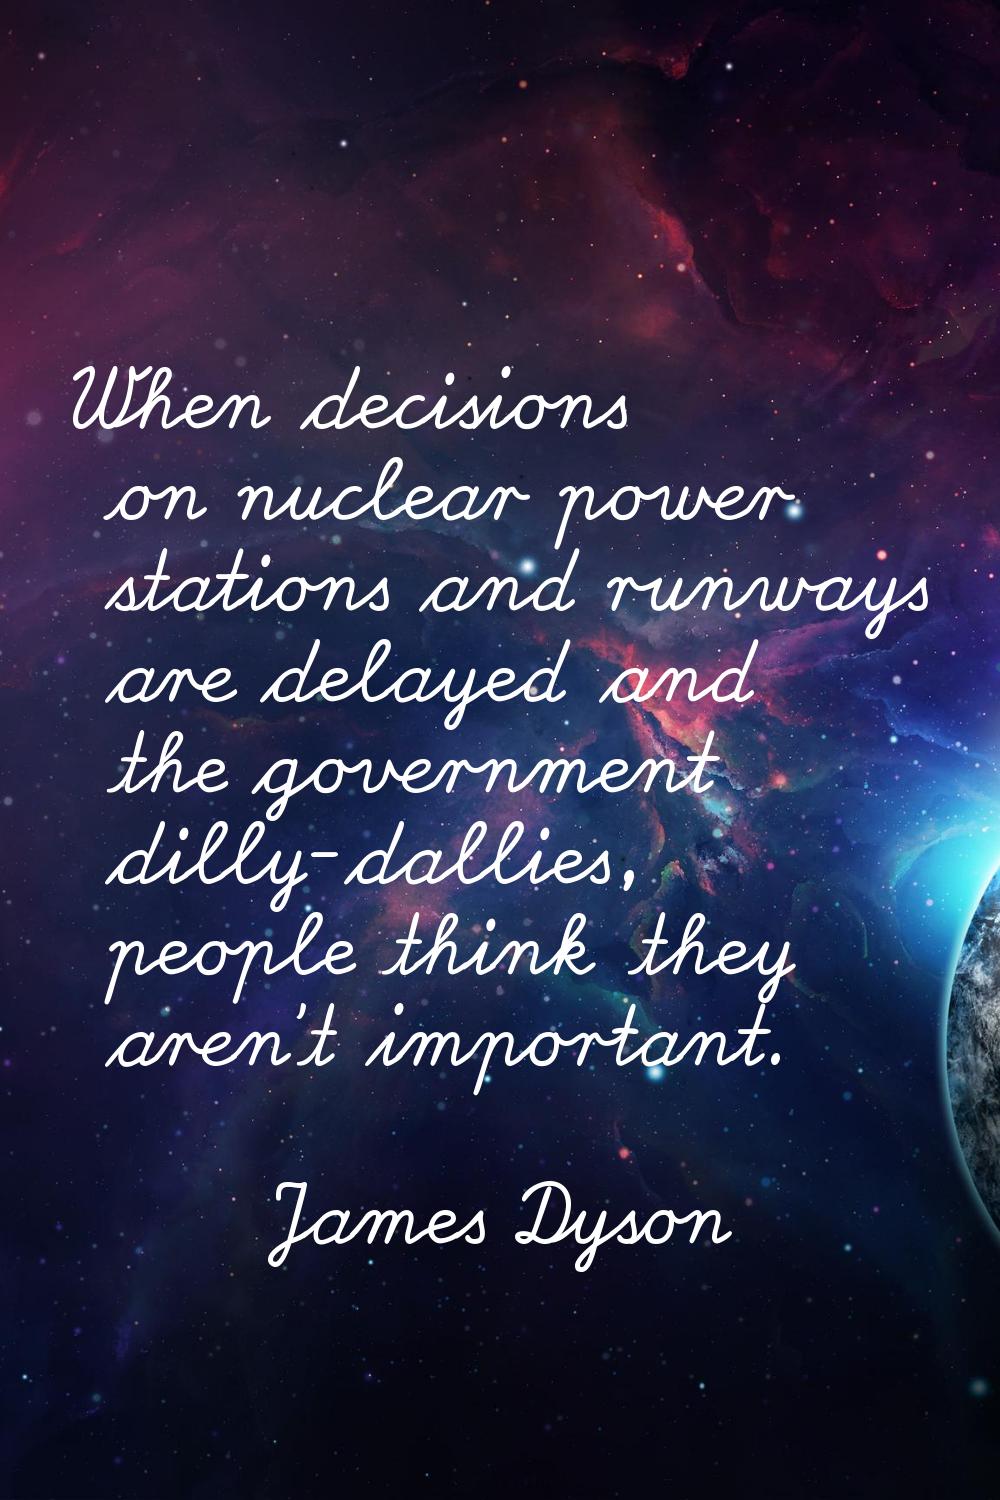 When decisions on nuclear power stations and runways are delayed and the government dilly-dallies, 